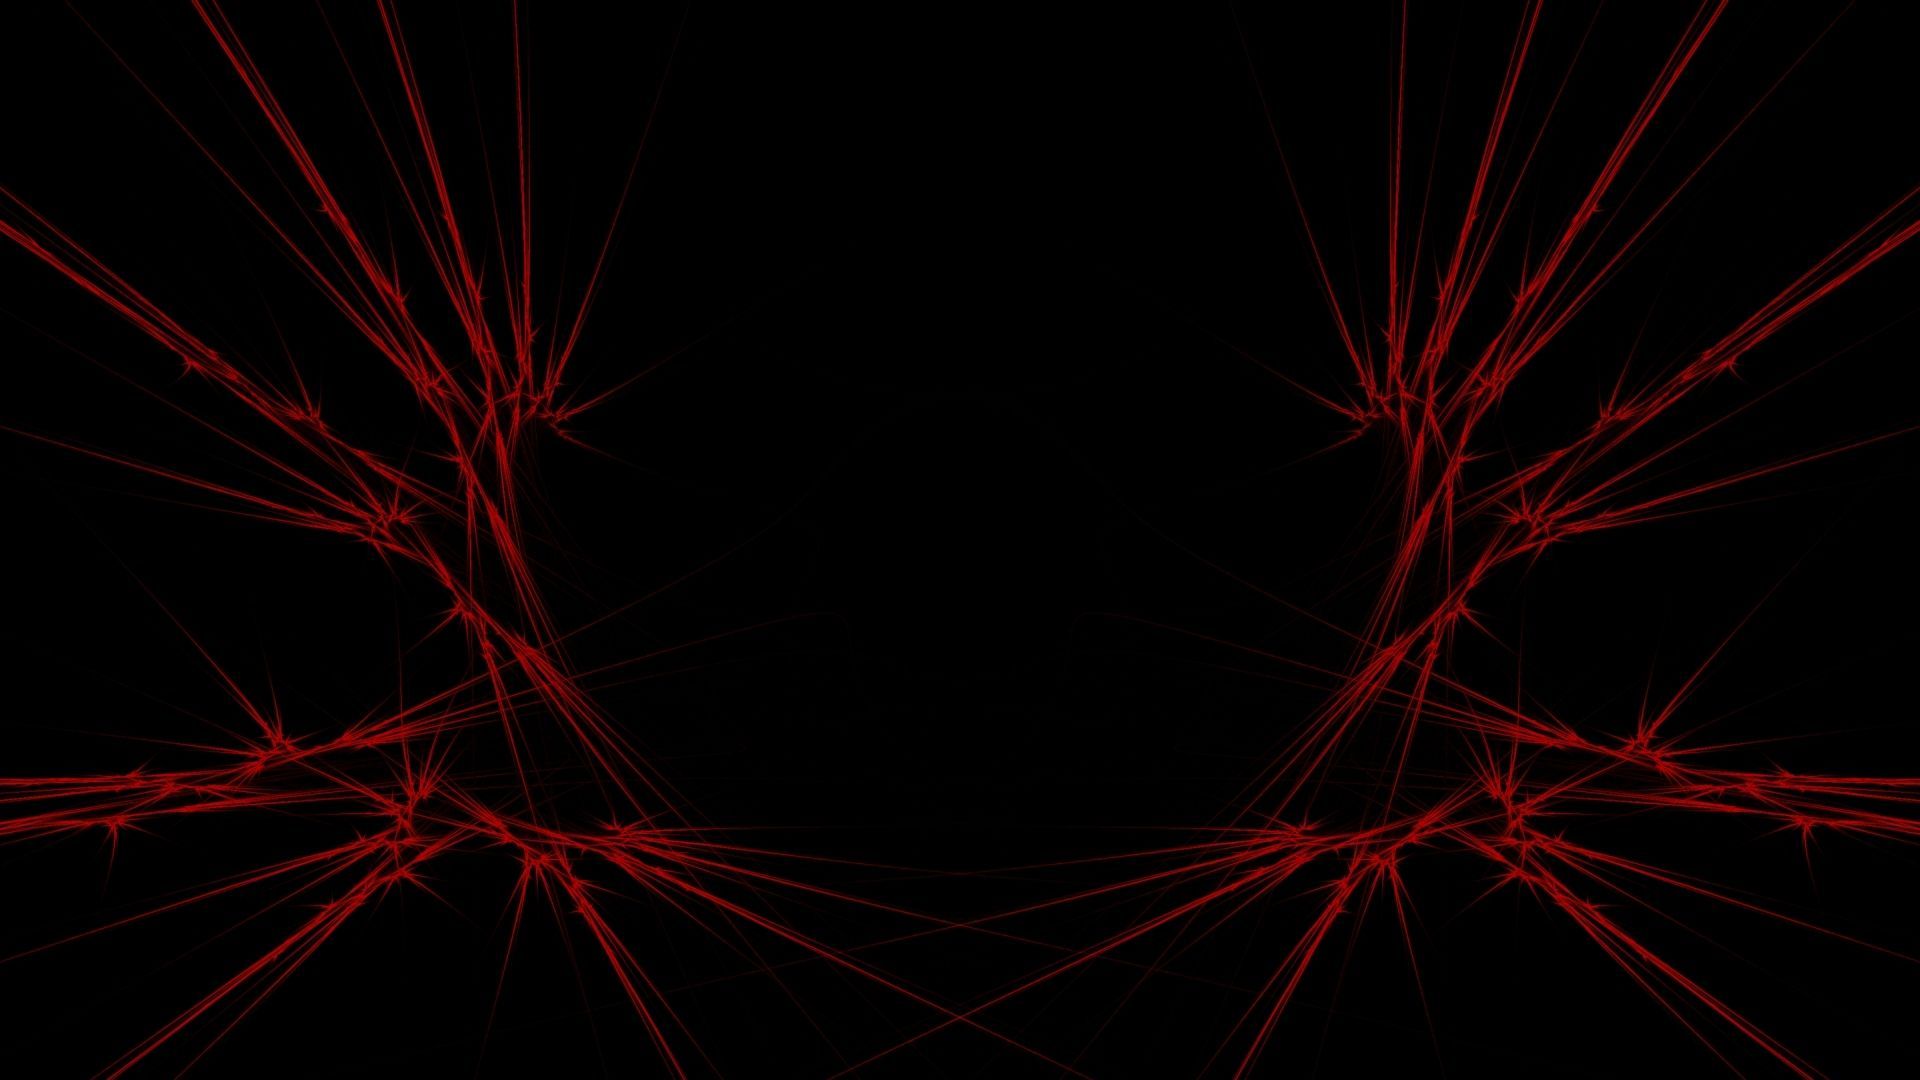 Download Wallpaper 1920x1080 Red, Black, Abstract Full HD 1080p HD